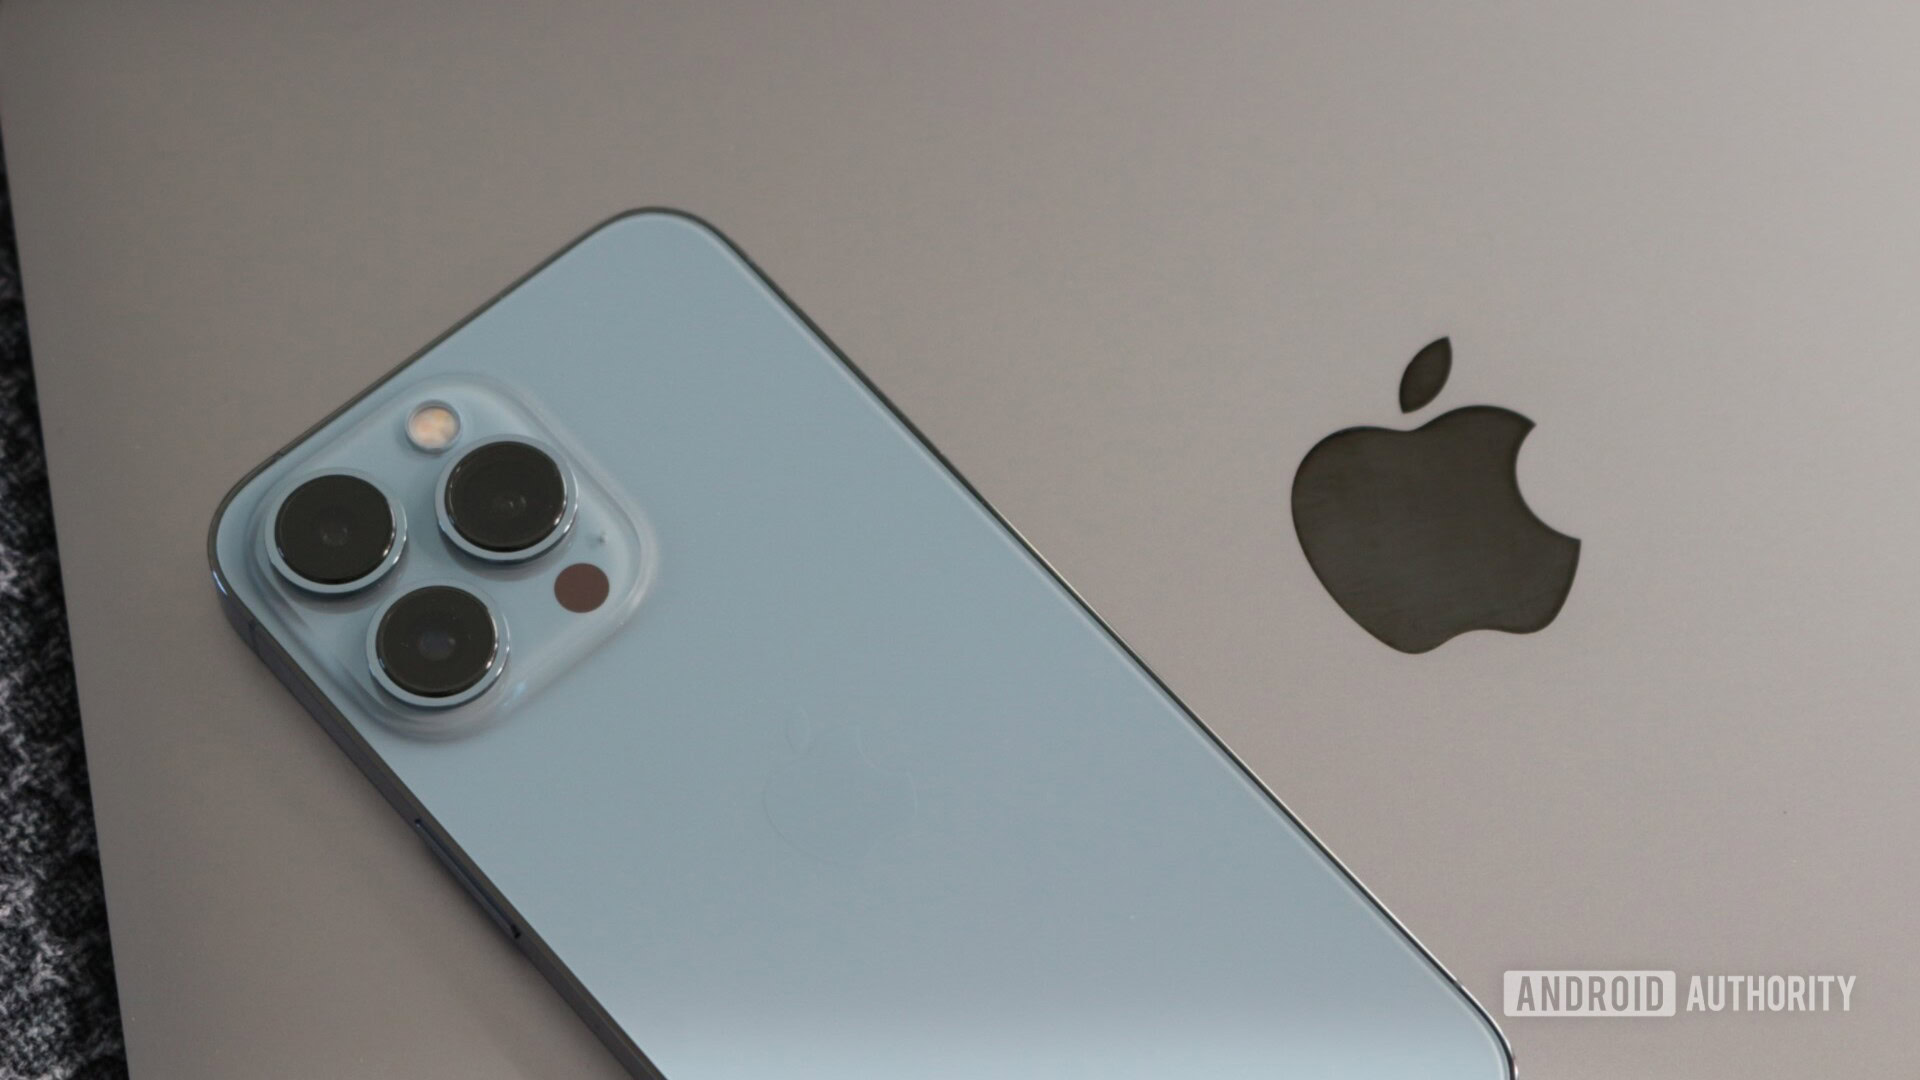 iPhone 13 Pro and iPhone 13 Pro Max - Apple (BY)